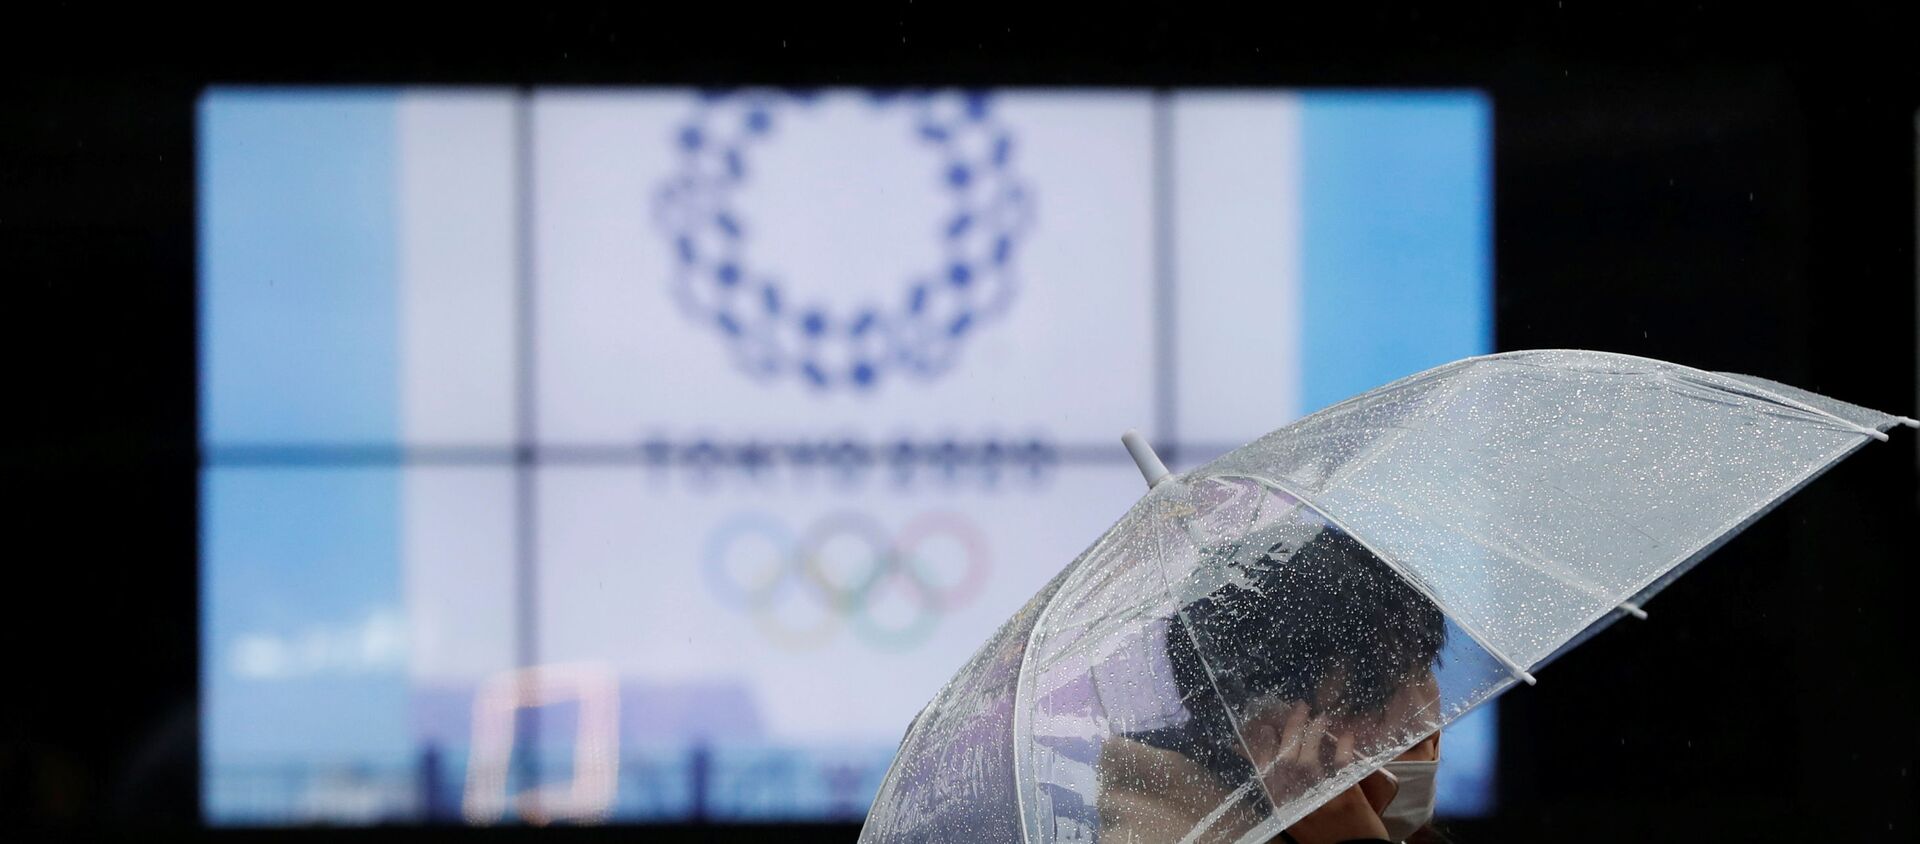 A passerby wearing a protective face mask walks past a display showing the logo of Tokyo 2020 Olympic Games that have been postponed to 2021 due to the coronavirus disease (COVID-19) outbreak, in Tokyo, Japan January 23, 2021. - 俄羅斯衛星通訊社, 1920, 08.02.2021